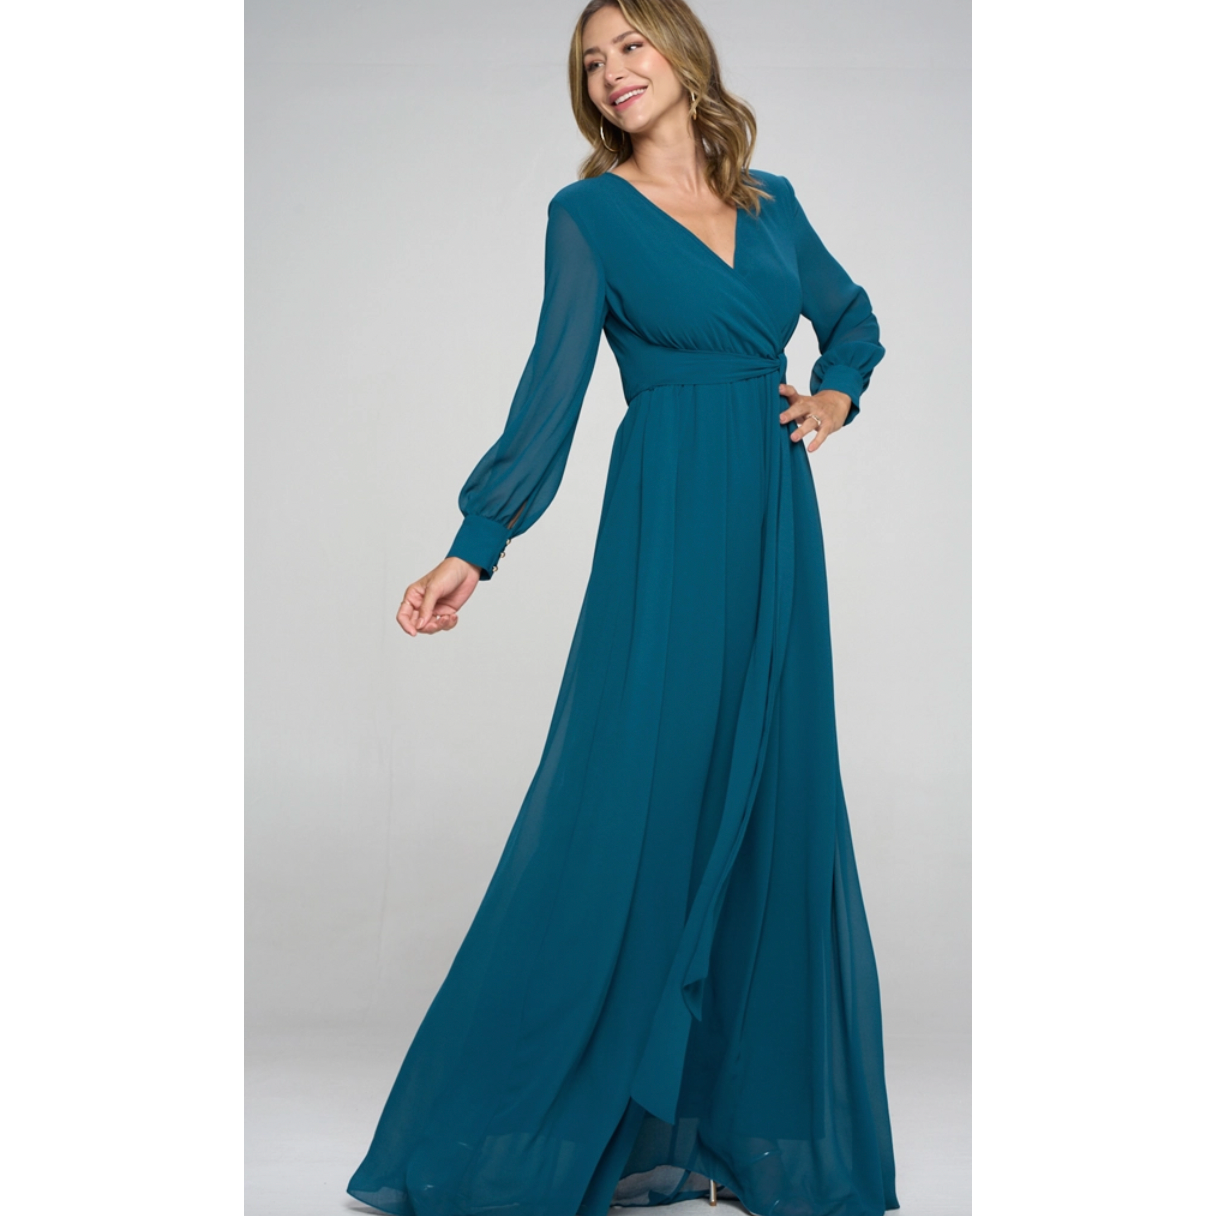 Teal Long Sleeve Maxi Gown Dress